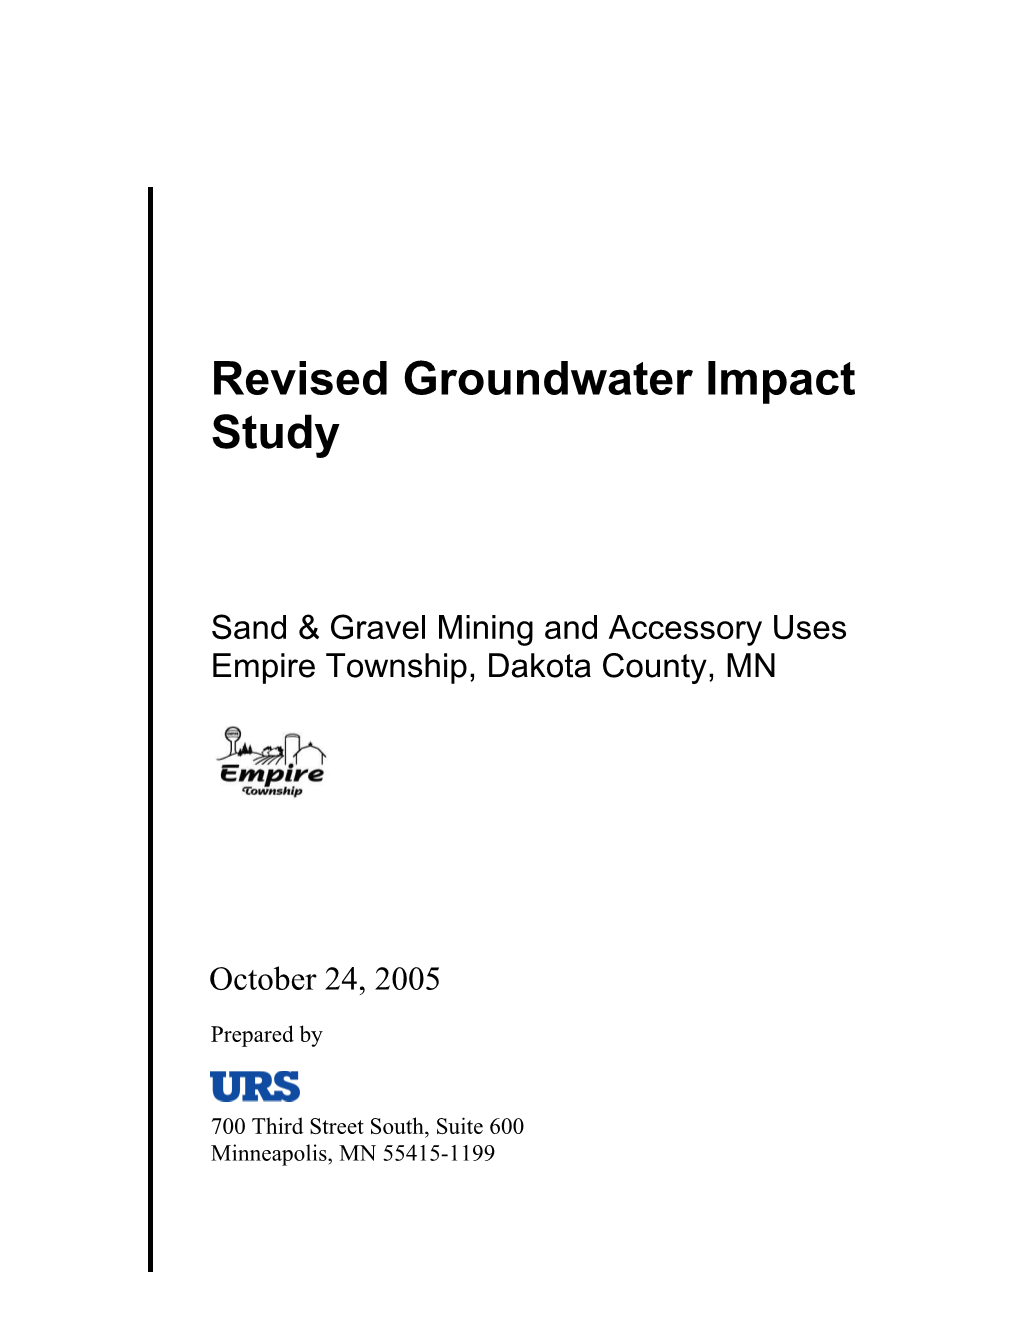 Revised Groundwater Impact Study